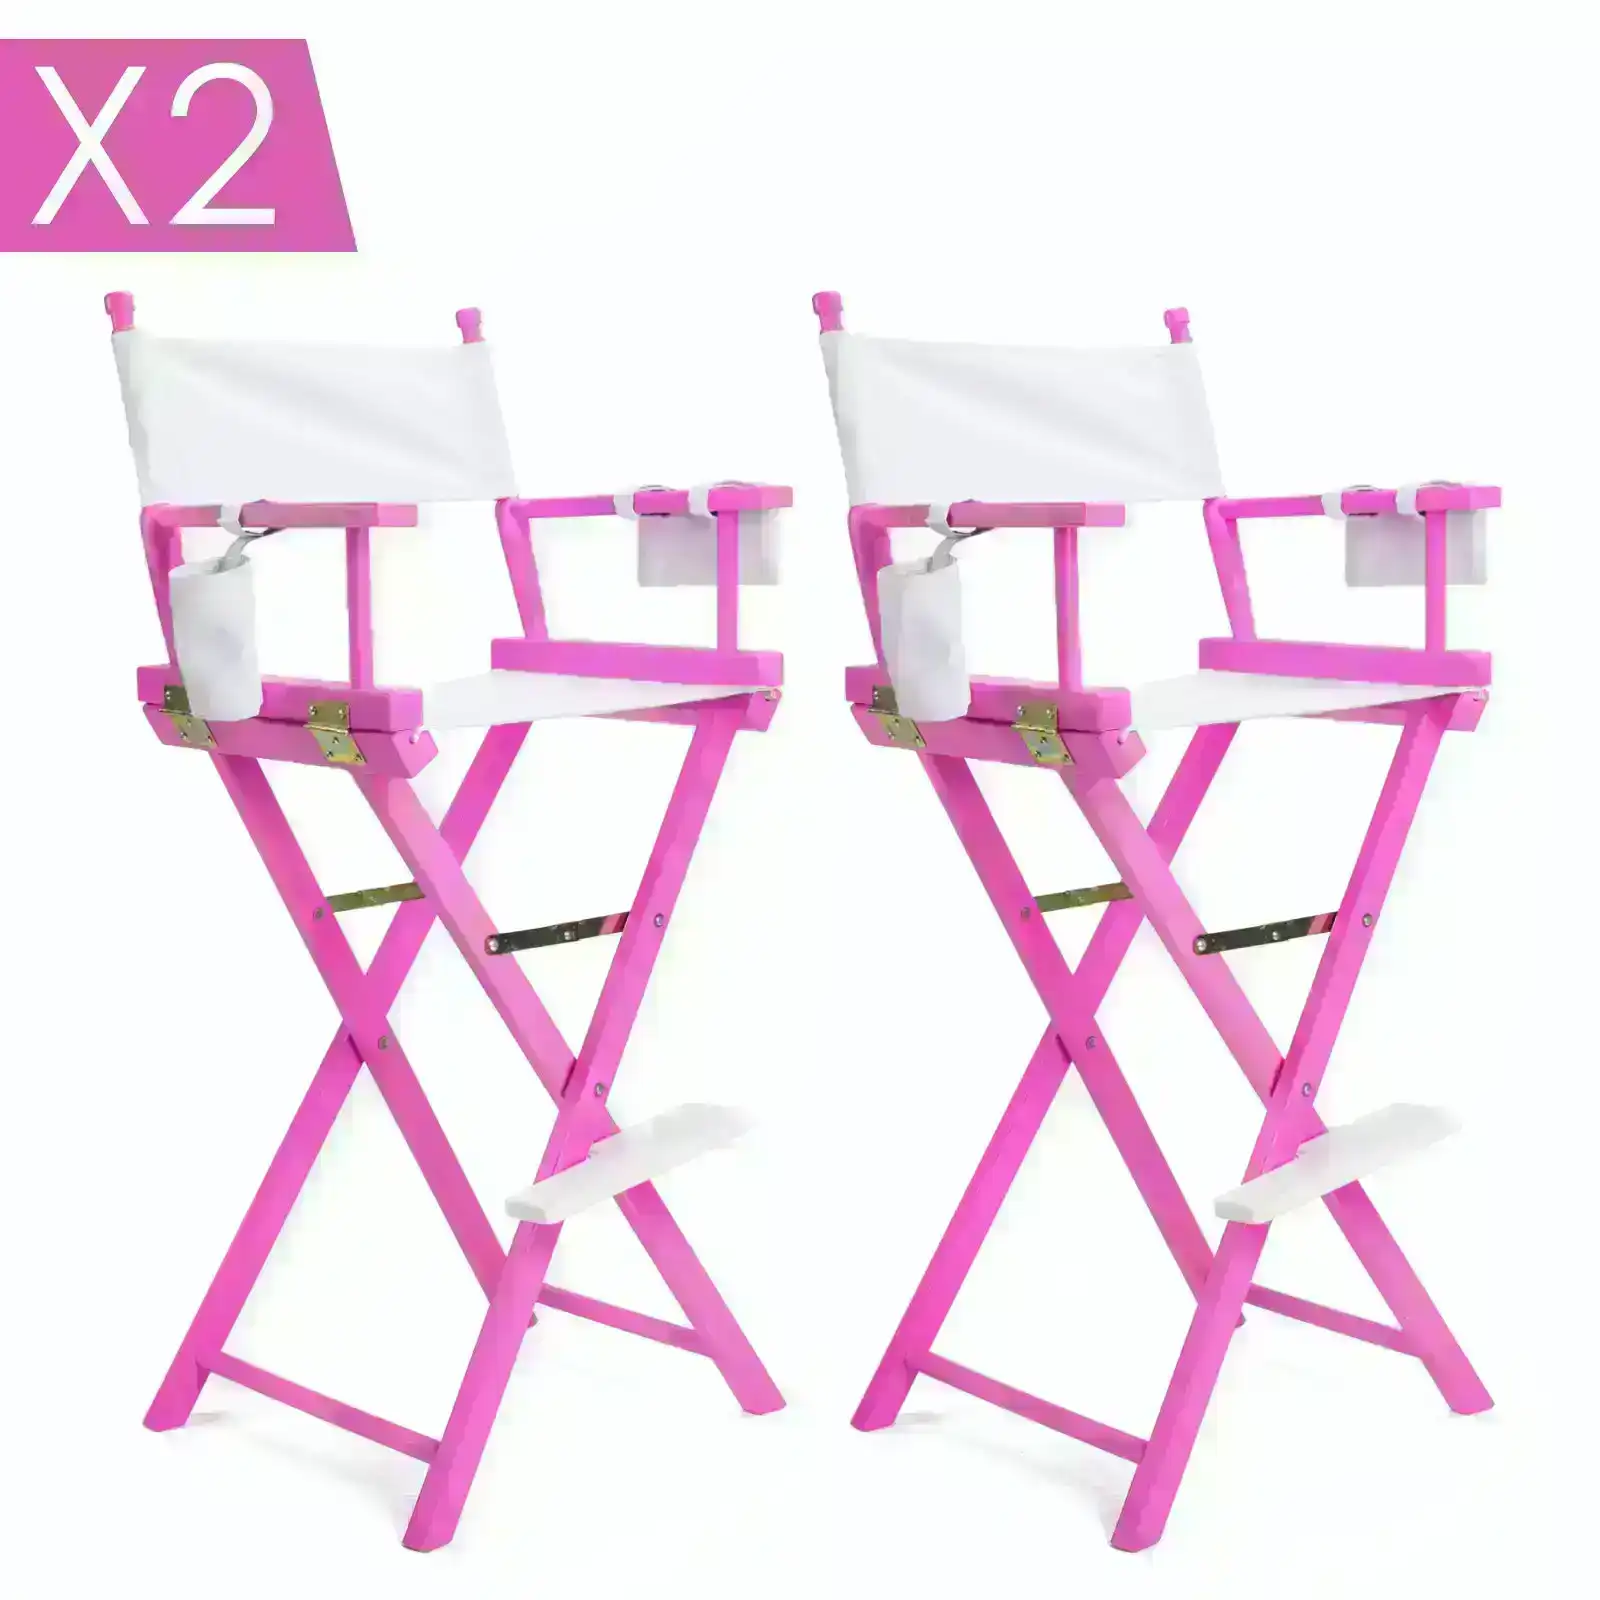 2X 75cm Tall Director Chair - PINK HUMOR